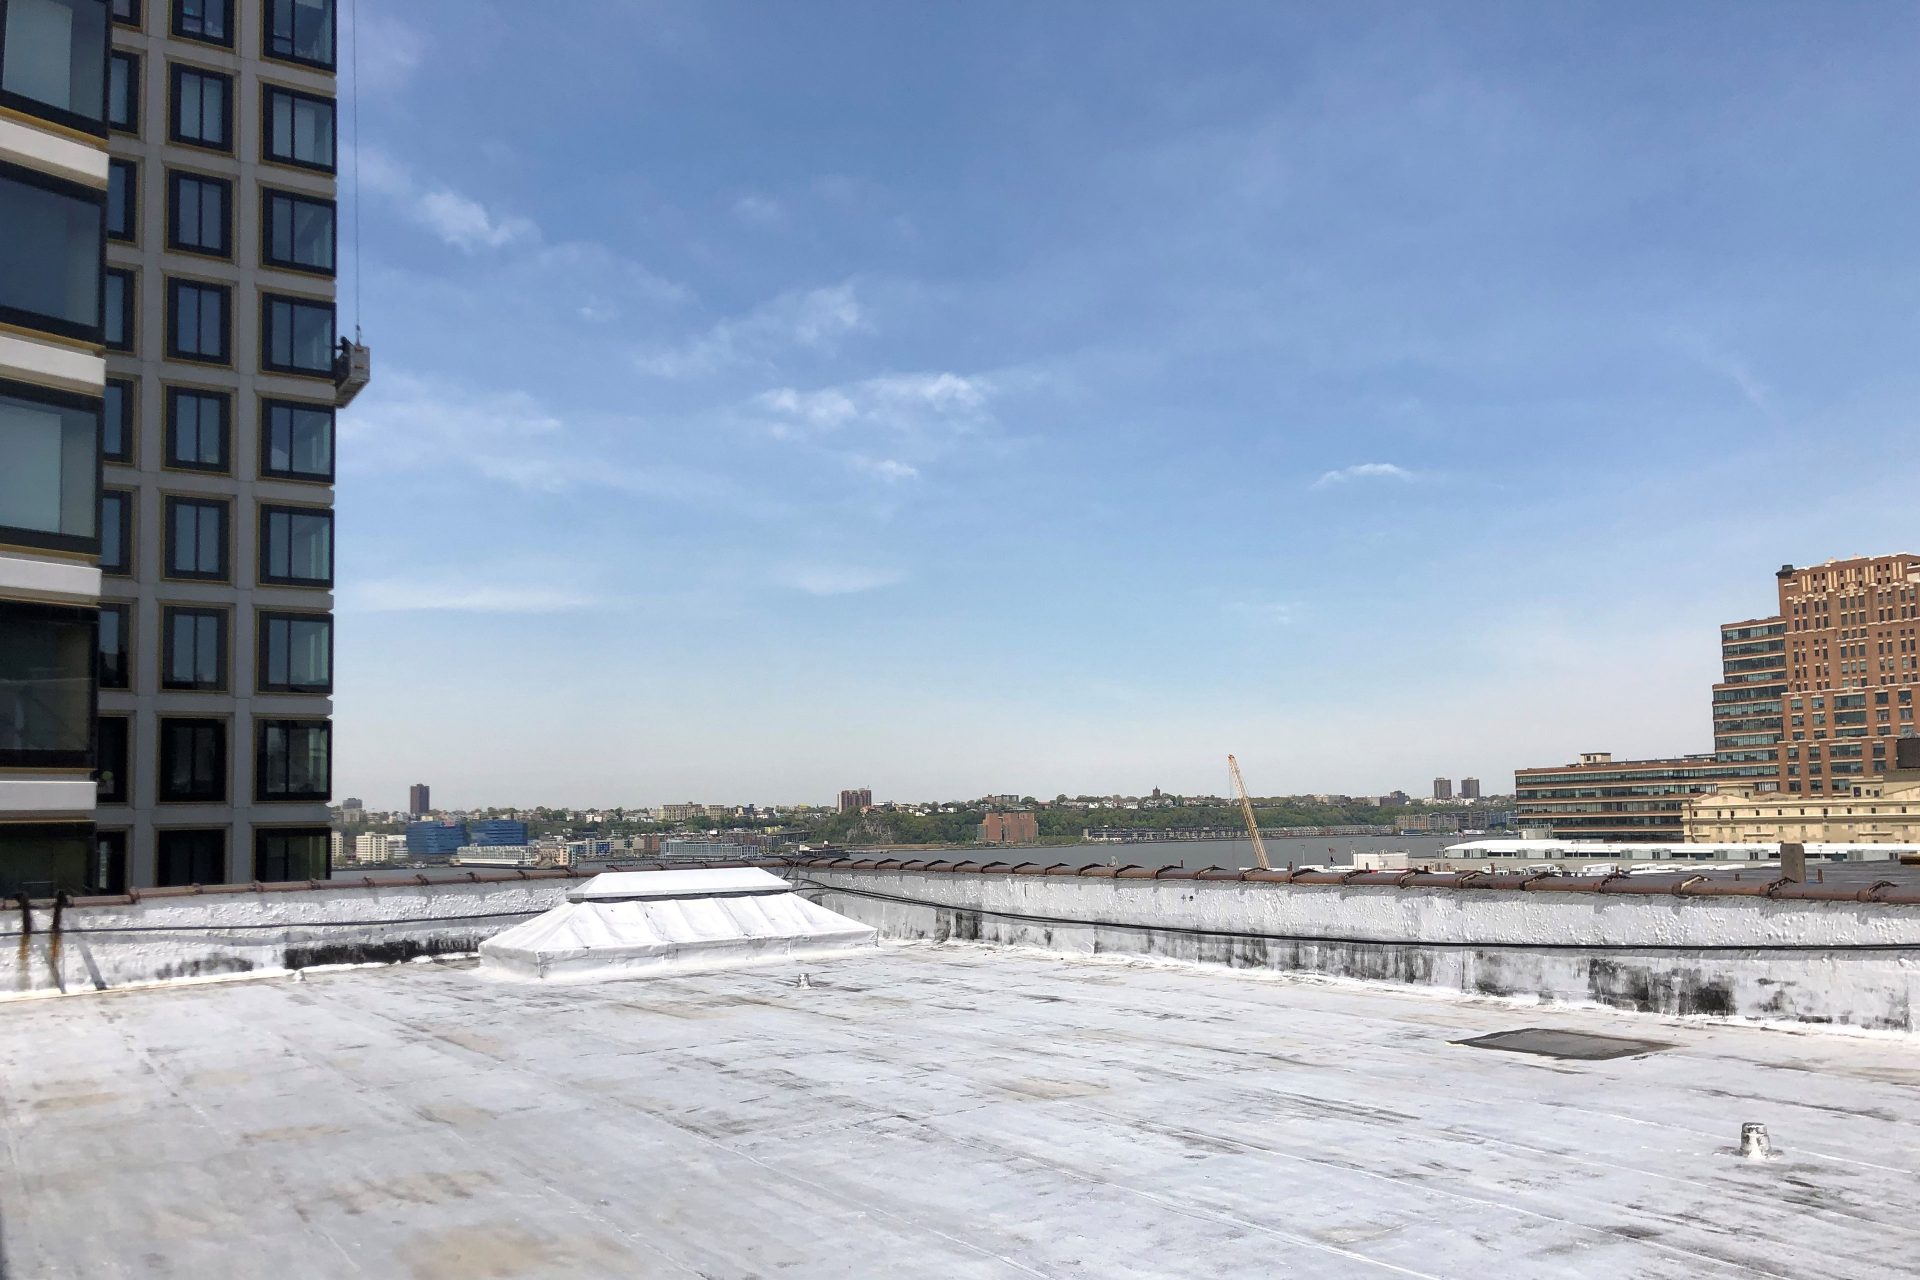 Existing, unused roof space at 541 West 21st Street